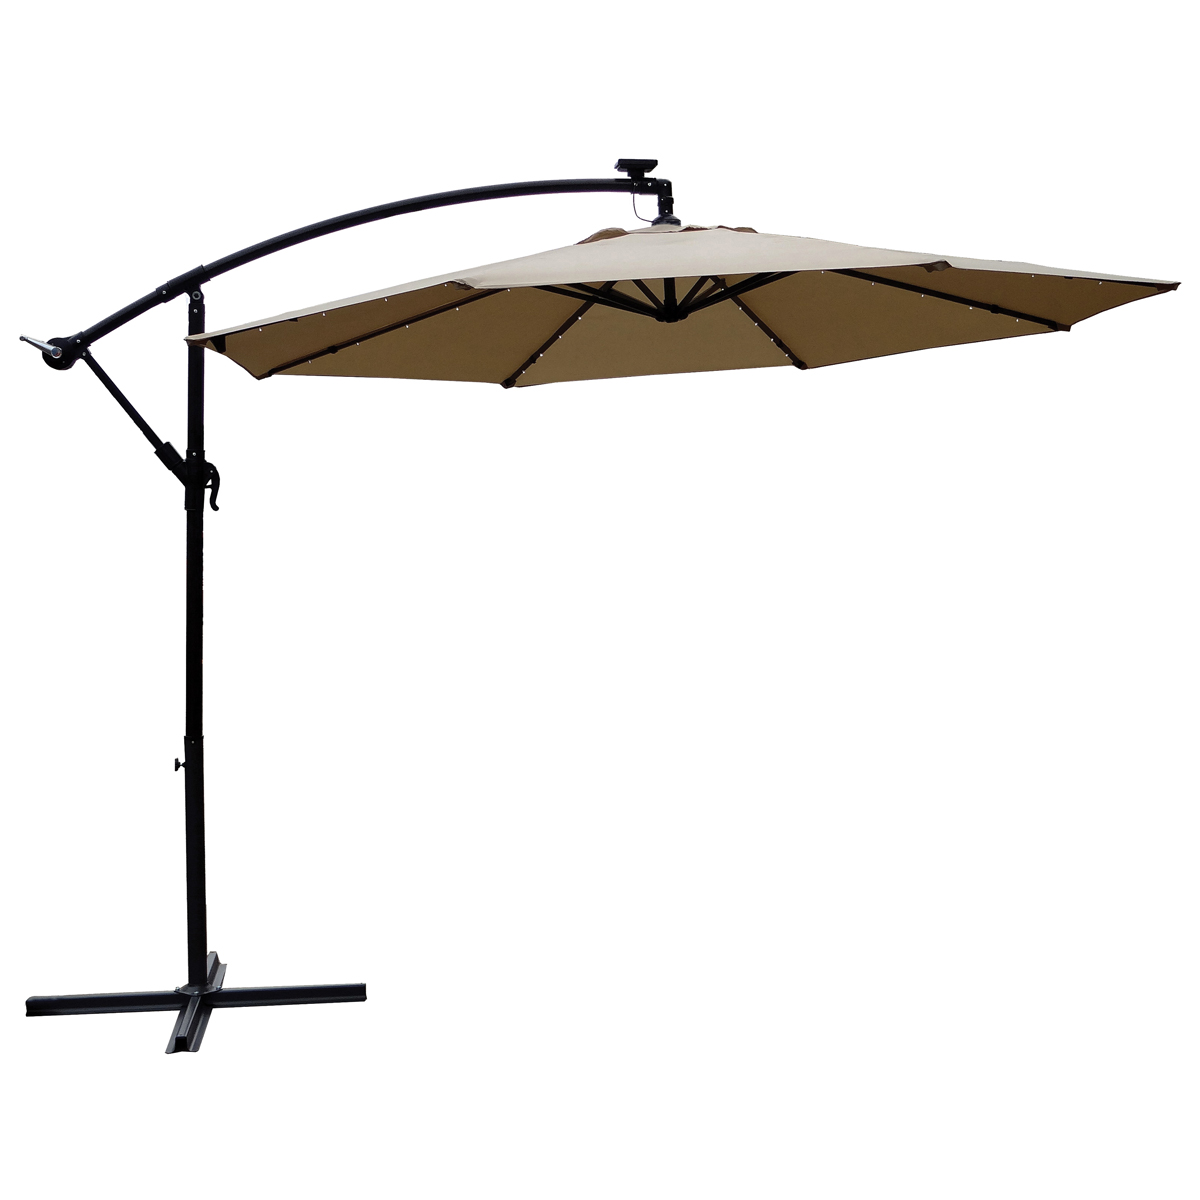 UMSCS10BKOBD-04 Solar Offset Taupe Umbrella, 2.5m/98.43 in H, 10 ft W Canopy, 10 ft L Canopy